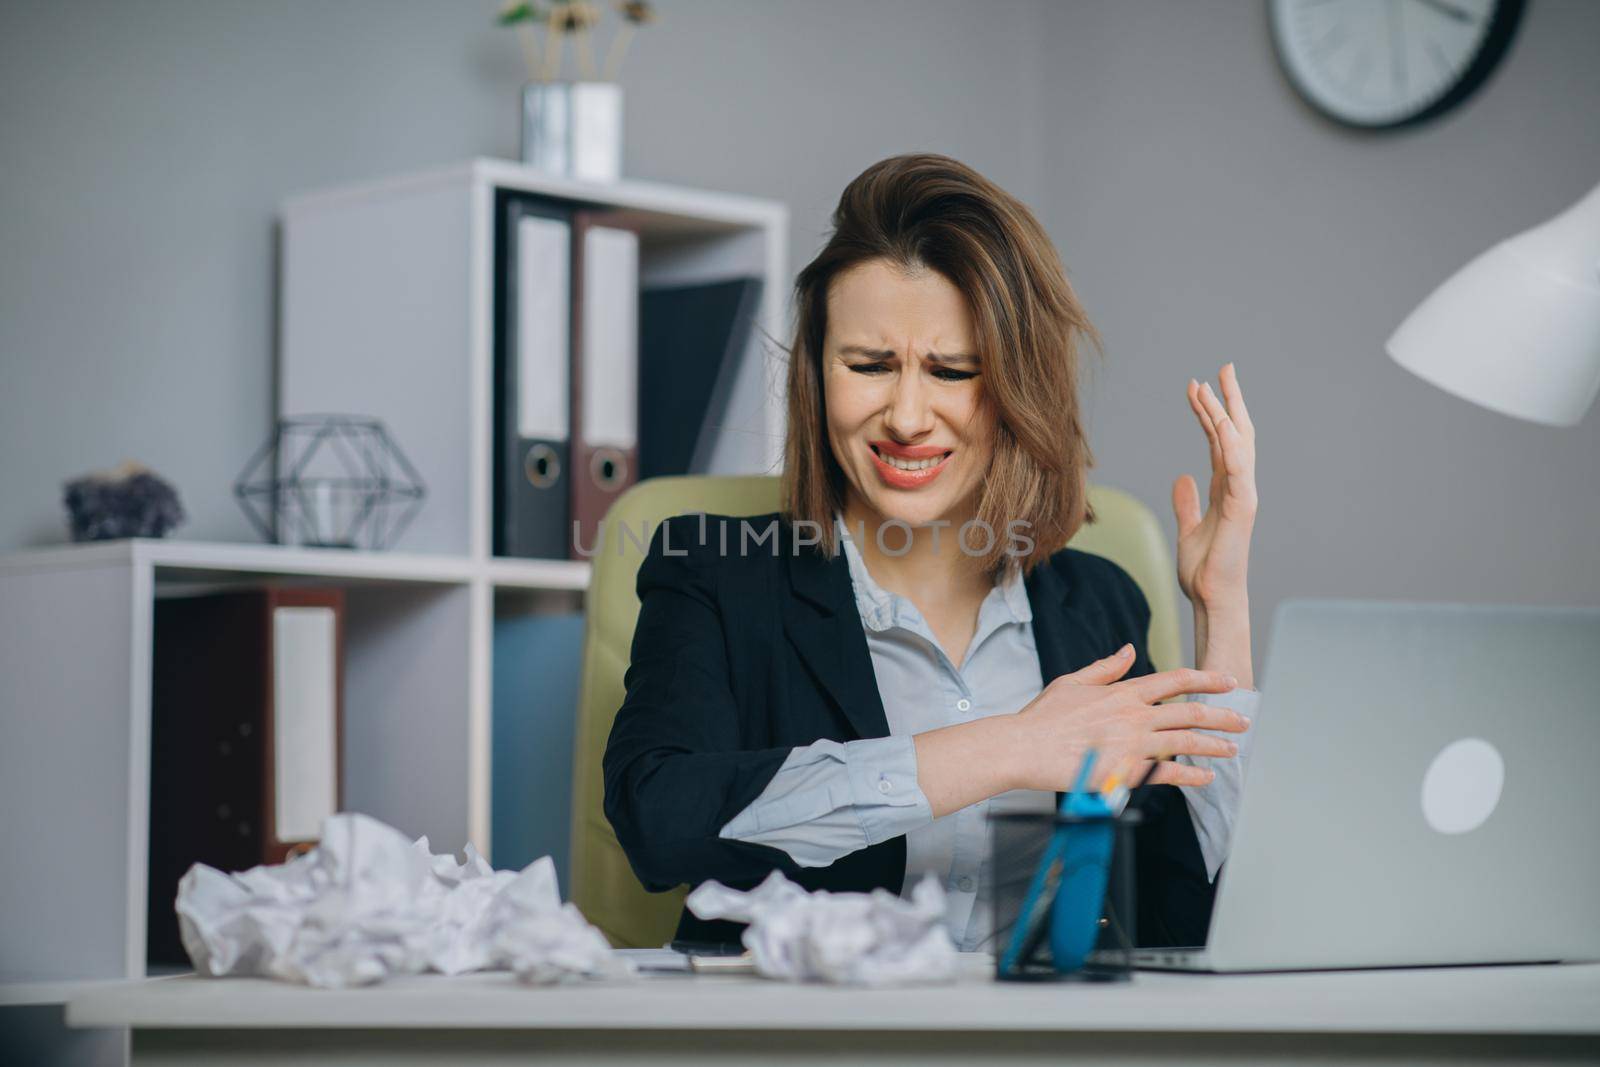 Stressed businesswoman annoyed using stuck laptop, angry woman mad about computer problem frustrated with data loss, online mistake, software error or system failure.